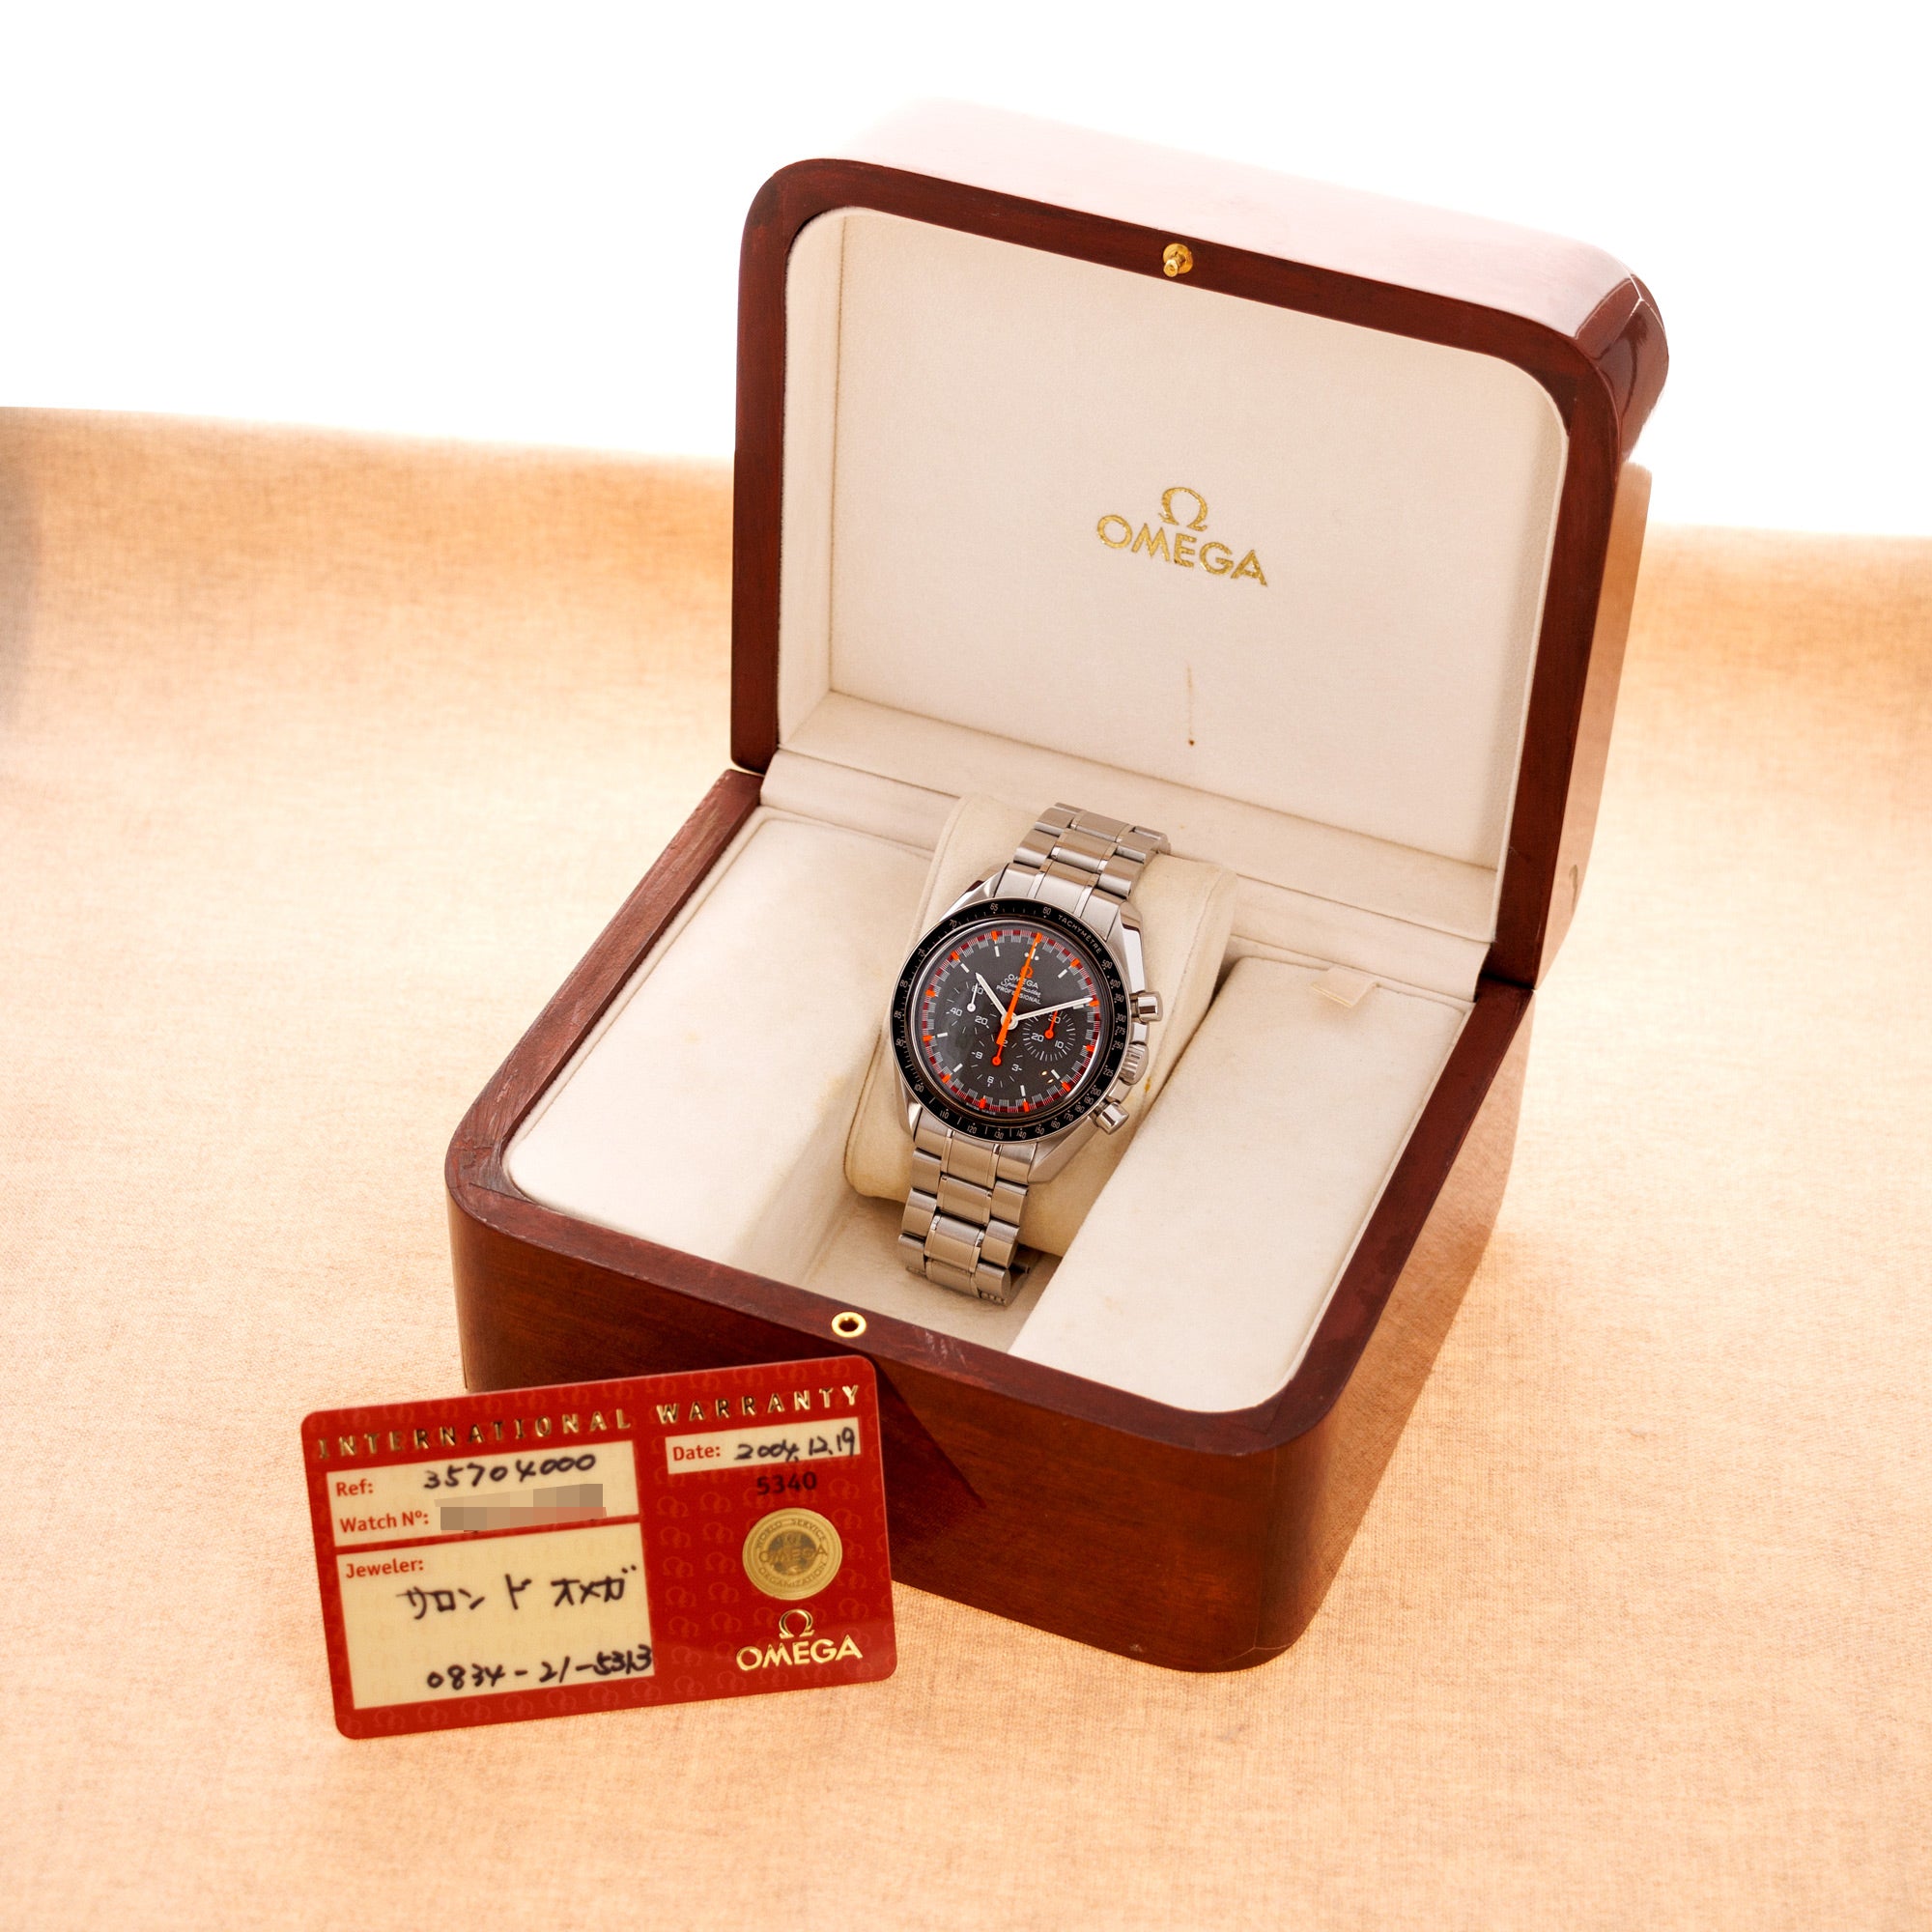 Omega - Omega Steel Speedmaster Ref. 3570.40 with Japan Racing Dial - The Keystone Watches